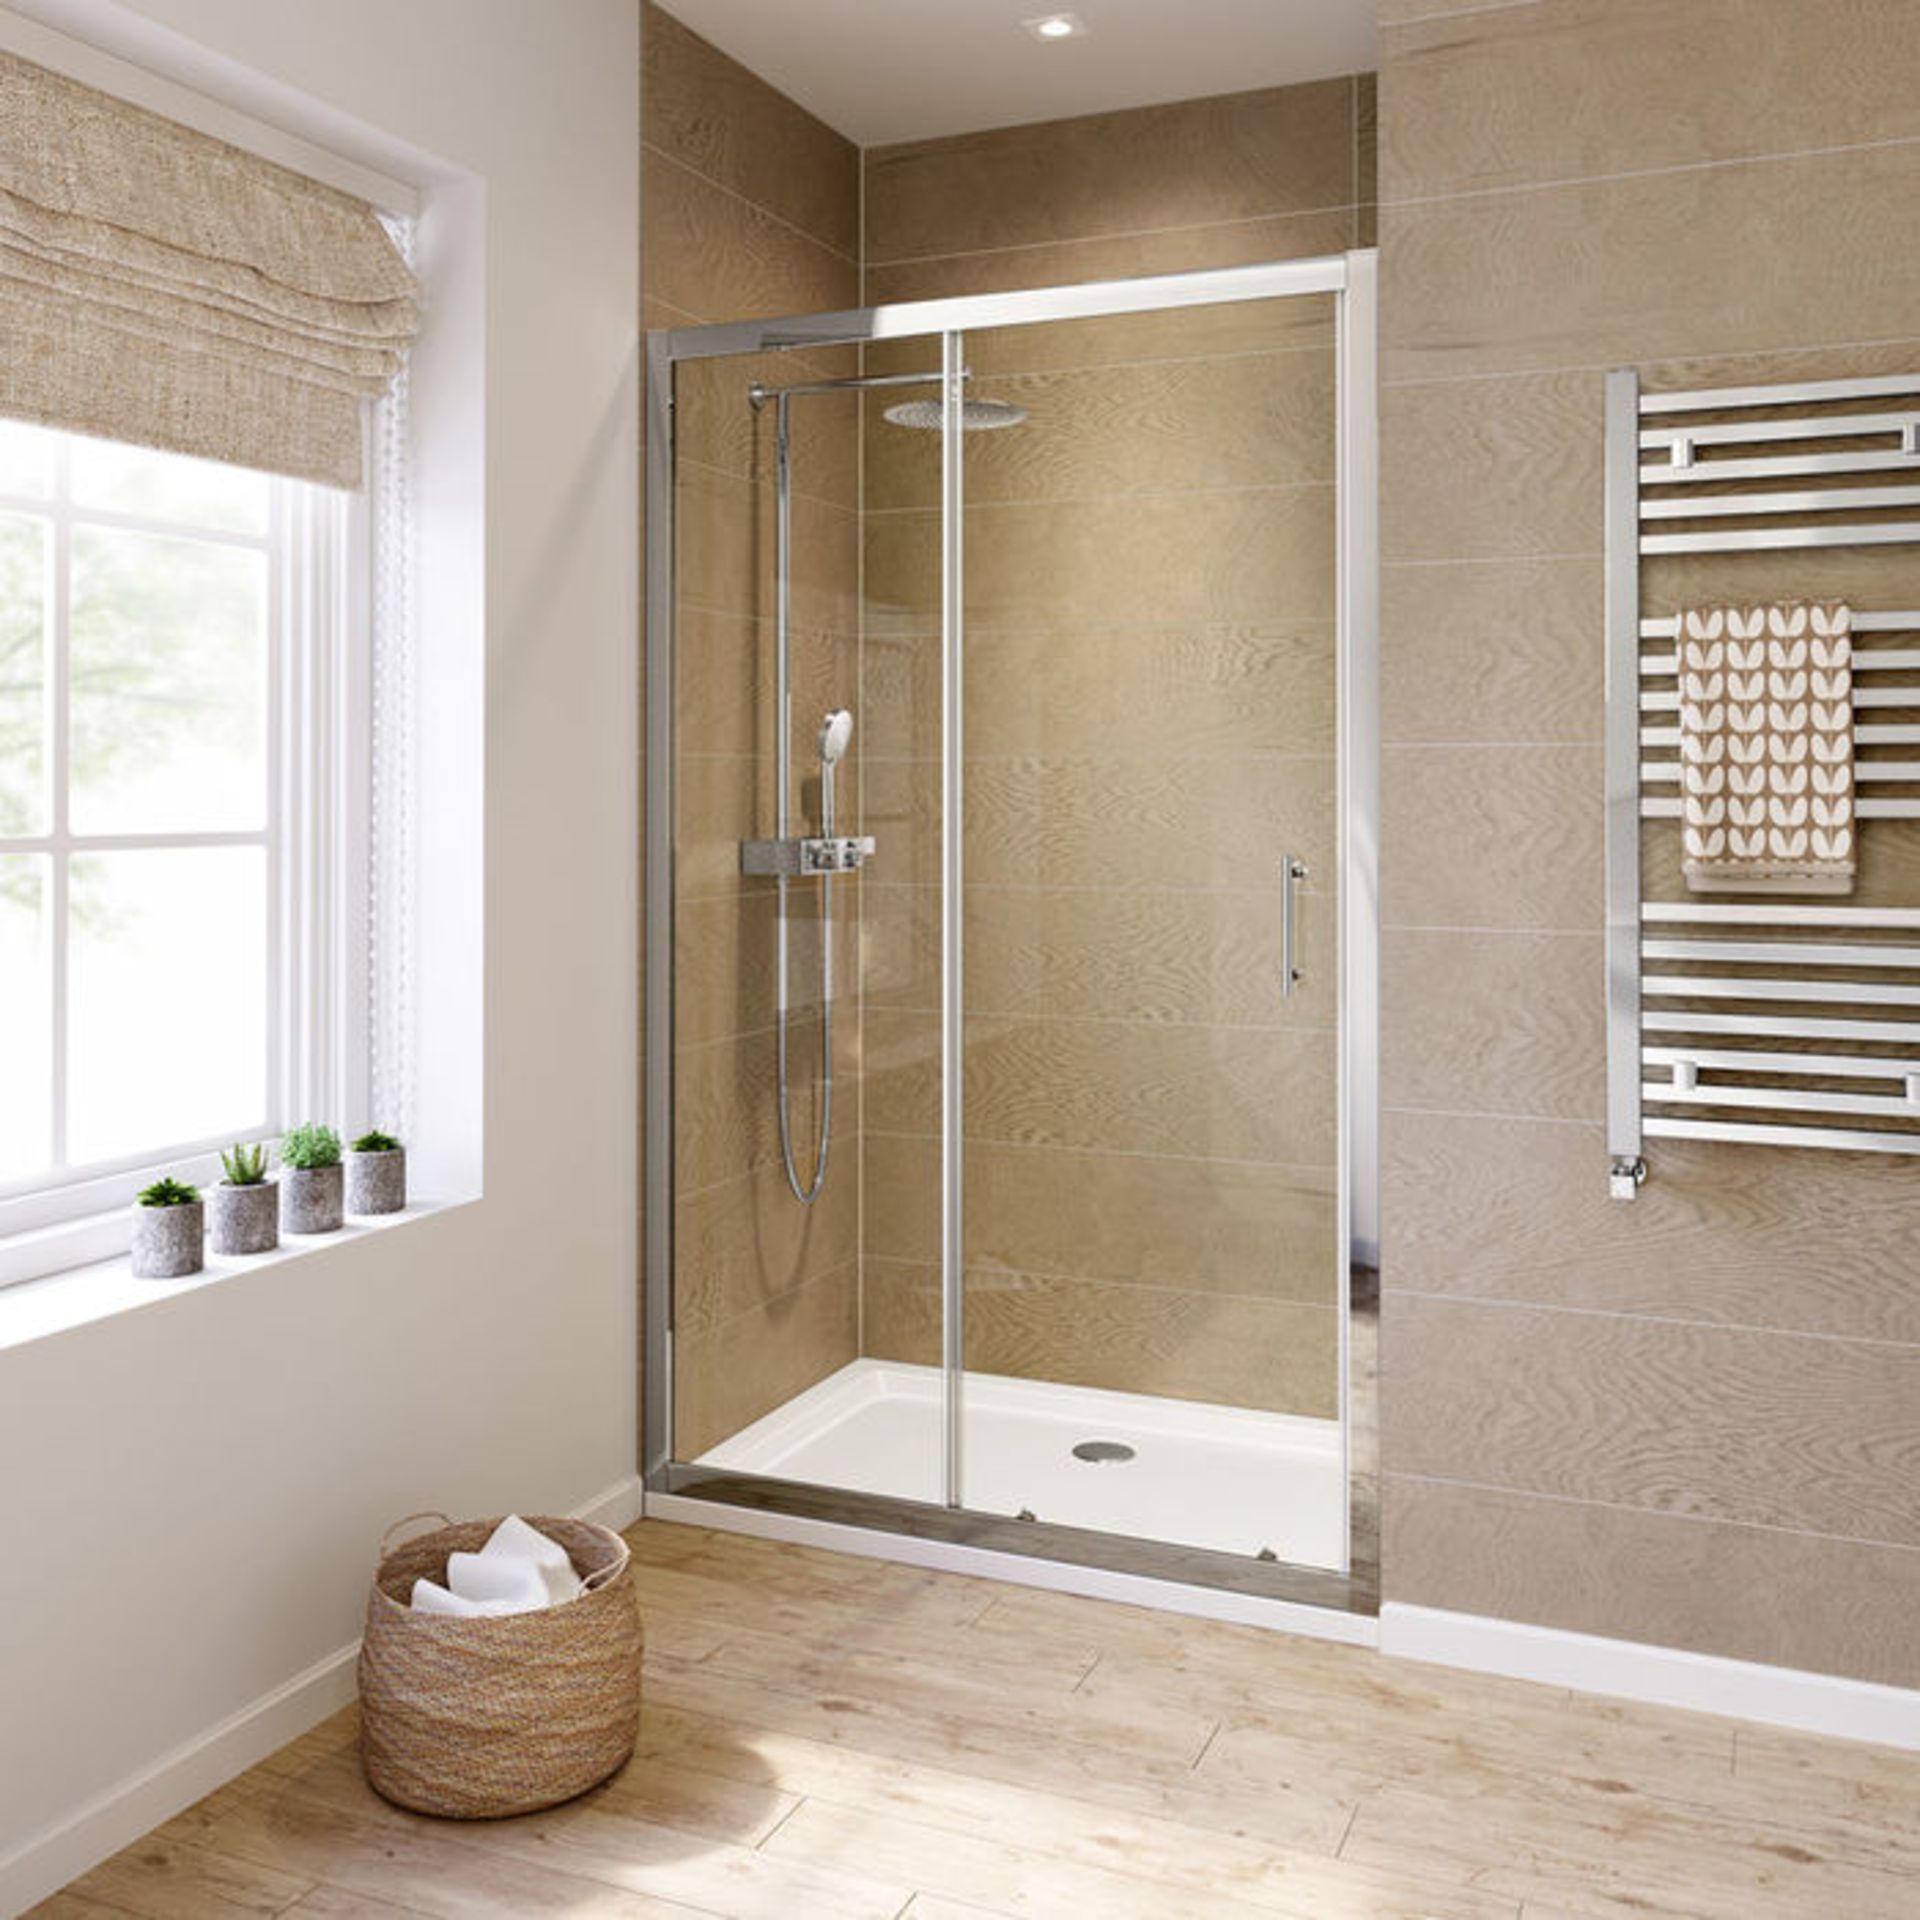 New Twyfords 1100mm - 6mm - Elements Sliding Shower Door. RRP £299.99. 6mm Safety Glass Fully... - Image 2 of 2